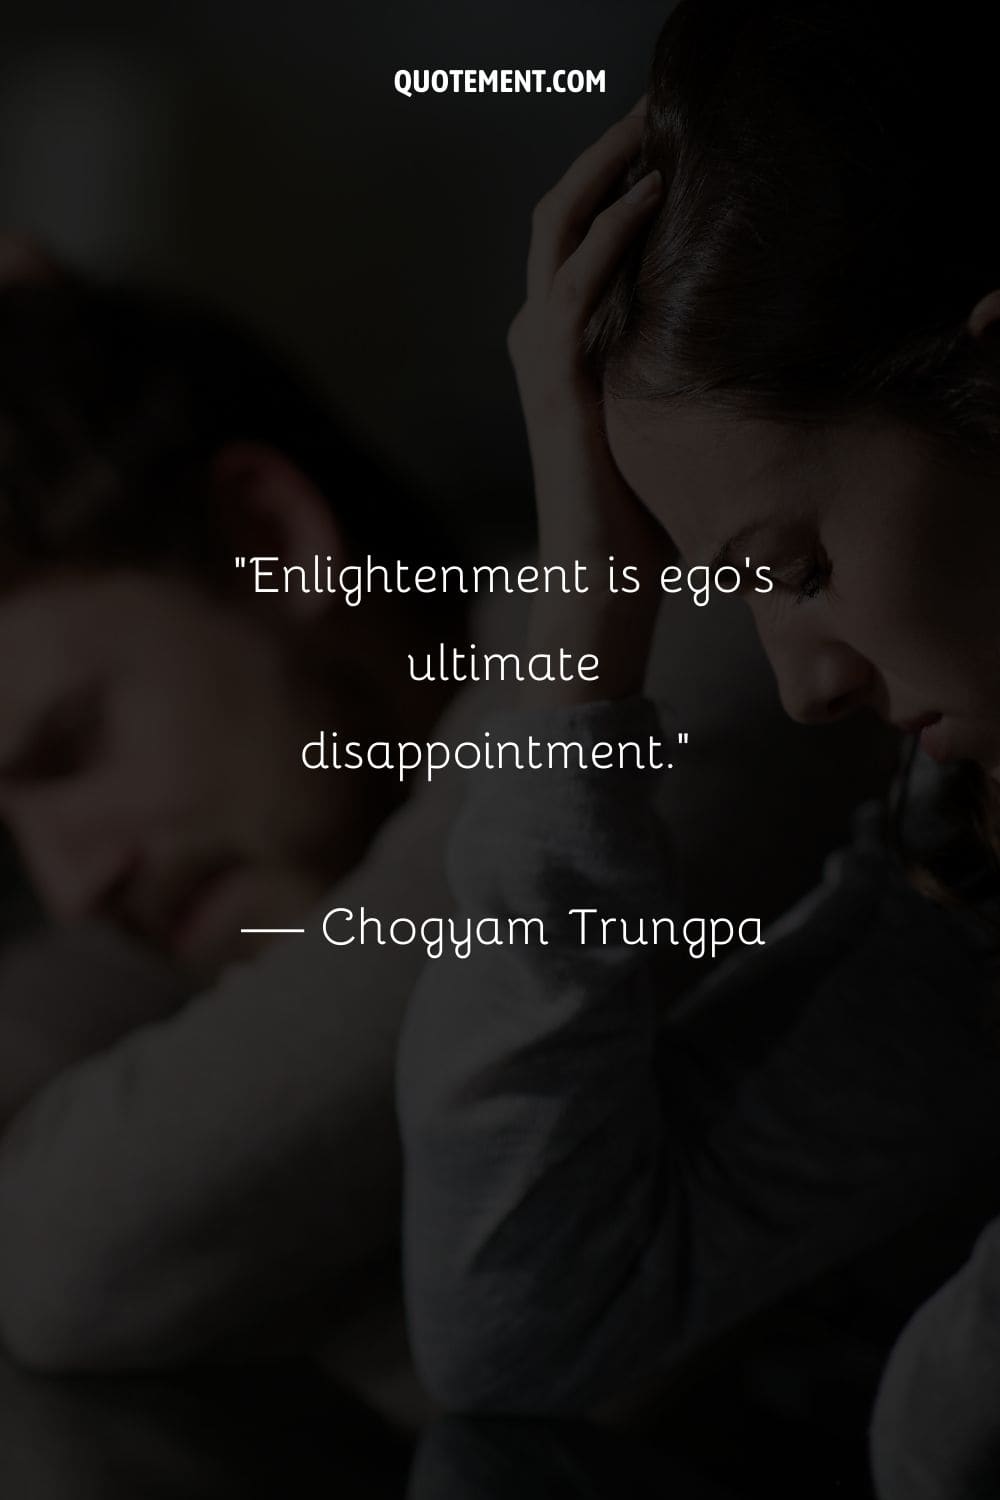 Enlightenment is ego’s ultimate disappointment